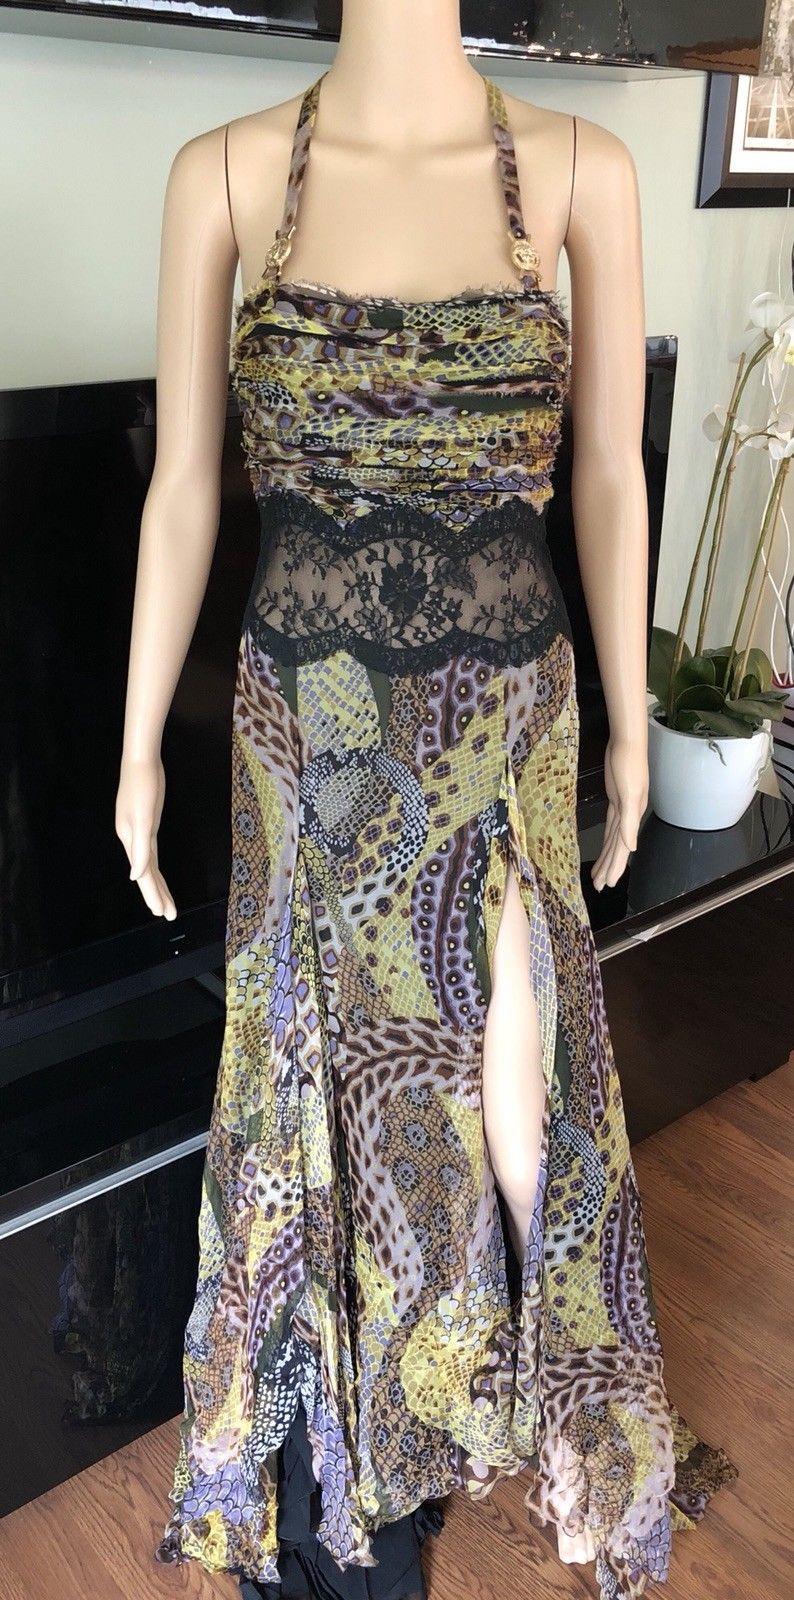 Versace F/W 2005 Animal Print Sheer Lace Panel Open Back Evening Dress Gown IT 40

Versace evening dress with lace panel at waist, tonal stitching and zip closure at side.

About Versace: Founded in 1978 by the late Gianni Versace, this Italian